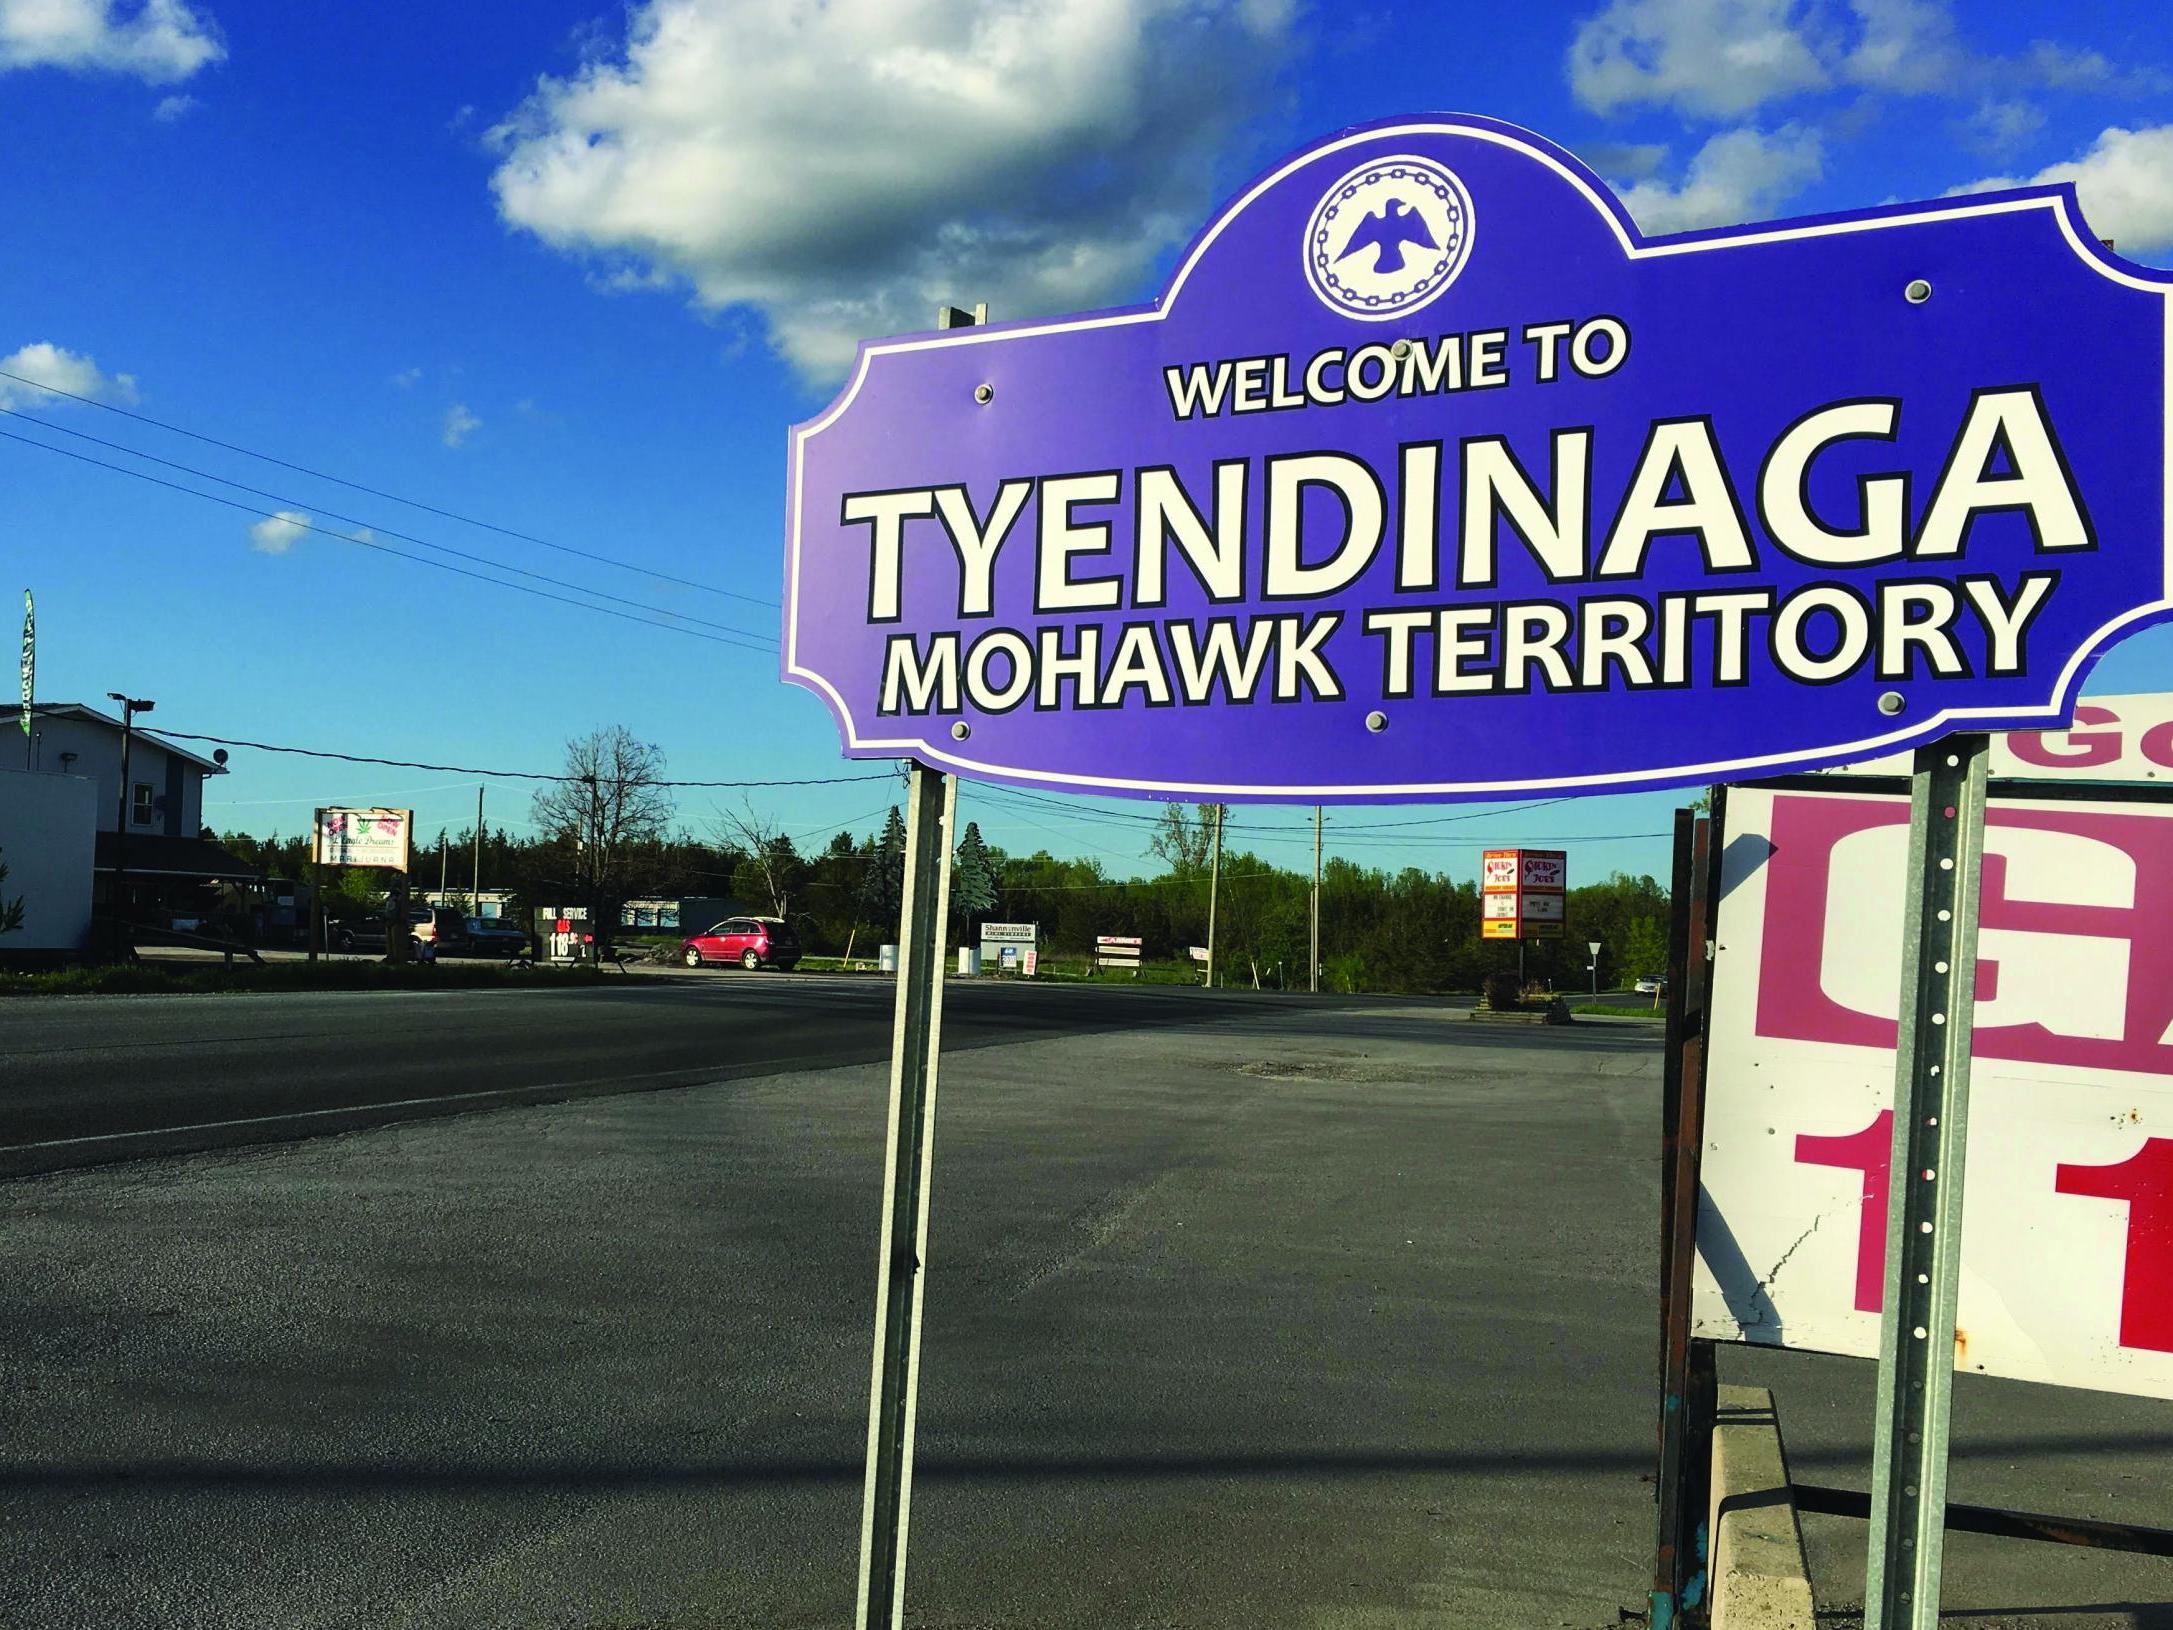 Canada’s tiny Mohawk territory of Tyendinaga is benefitting hugely from the cannabis business (Brad Hunter/The Independent)